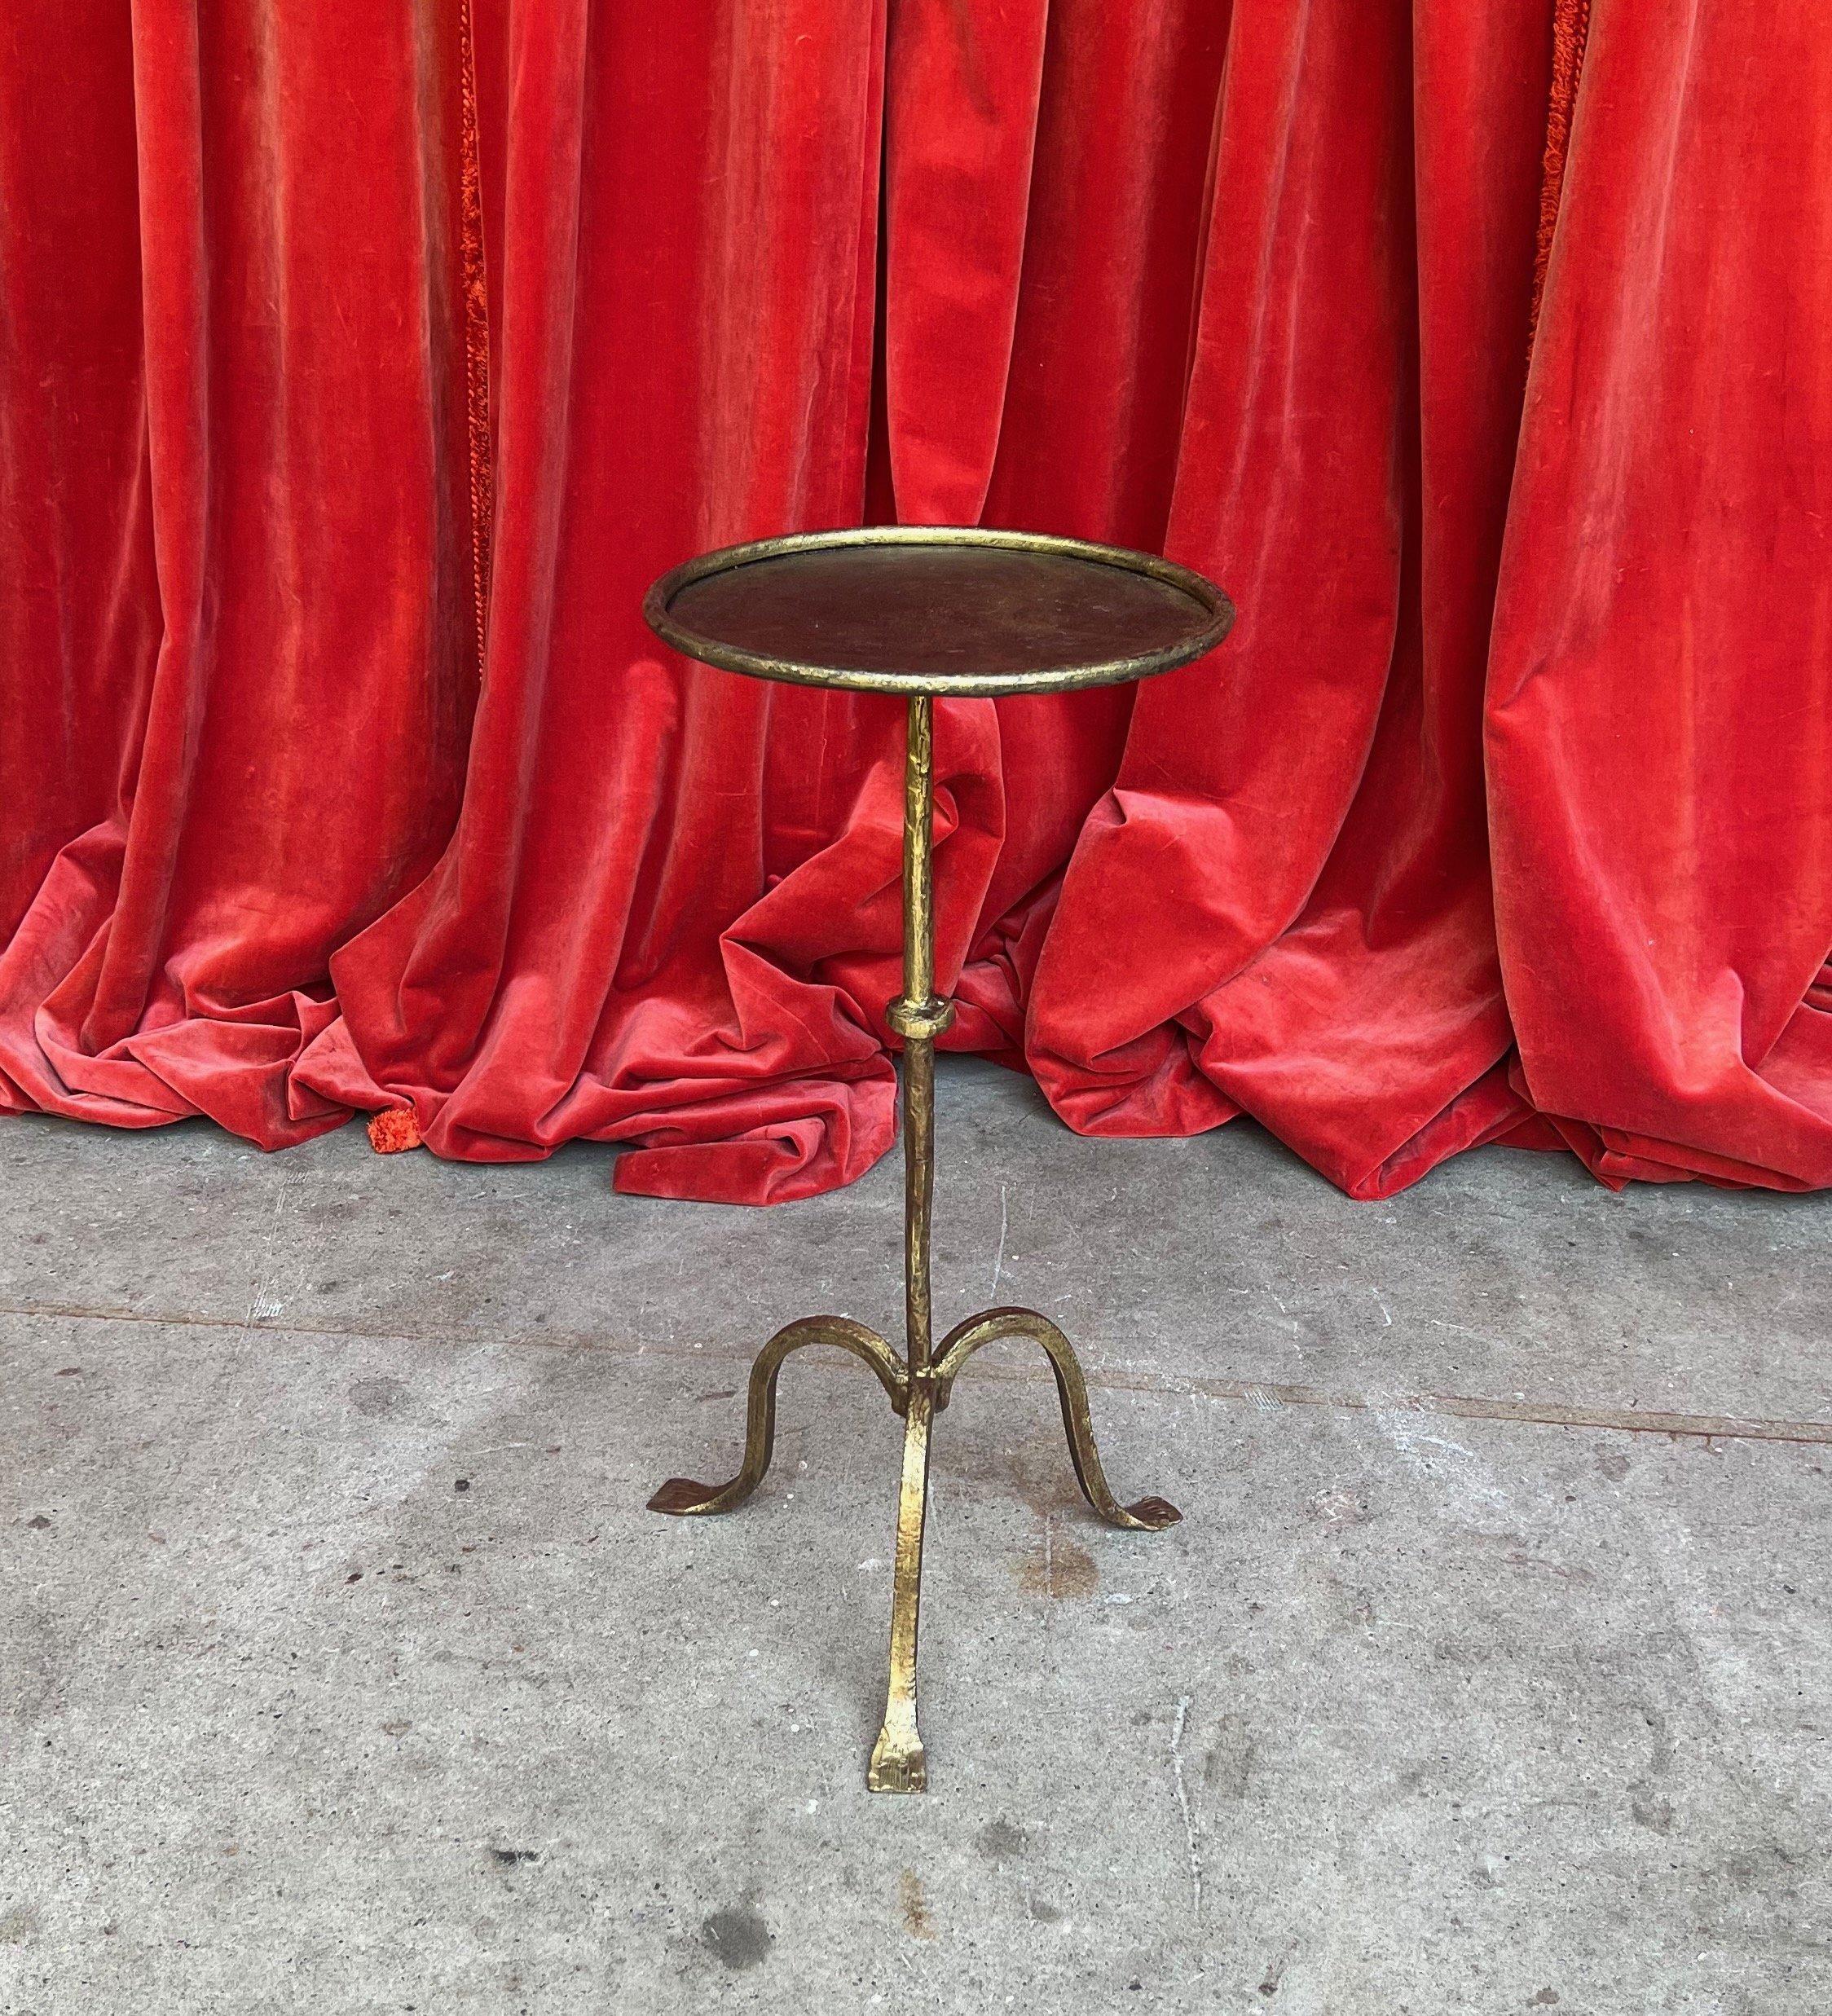 A simple yet enchanting Spanish gilt iron martini table from the 1950s featuring the original hand-applied gold finish with darker undertones, resulting in a rich and unique appearance. The elegant drinks table boasts a distinctive tripod base with